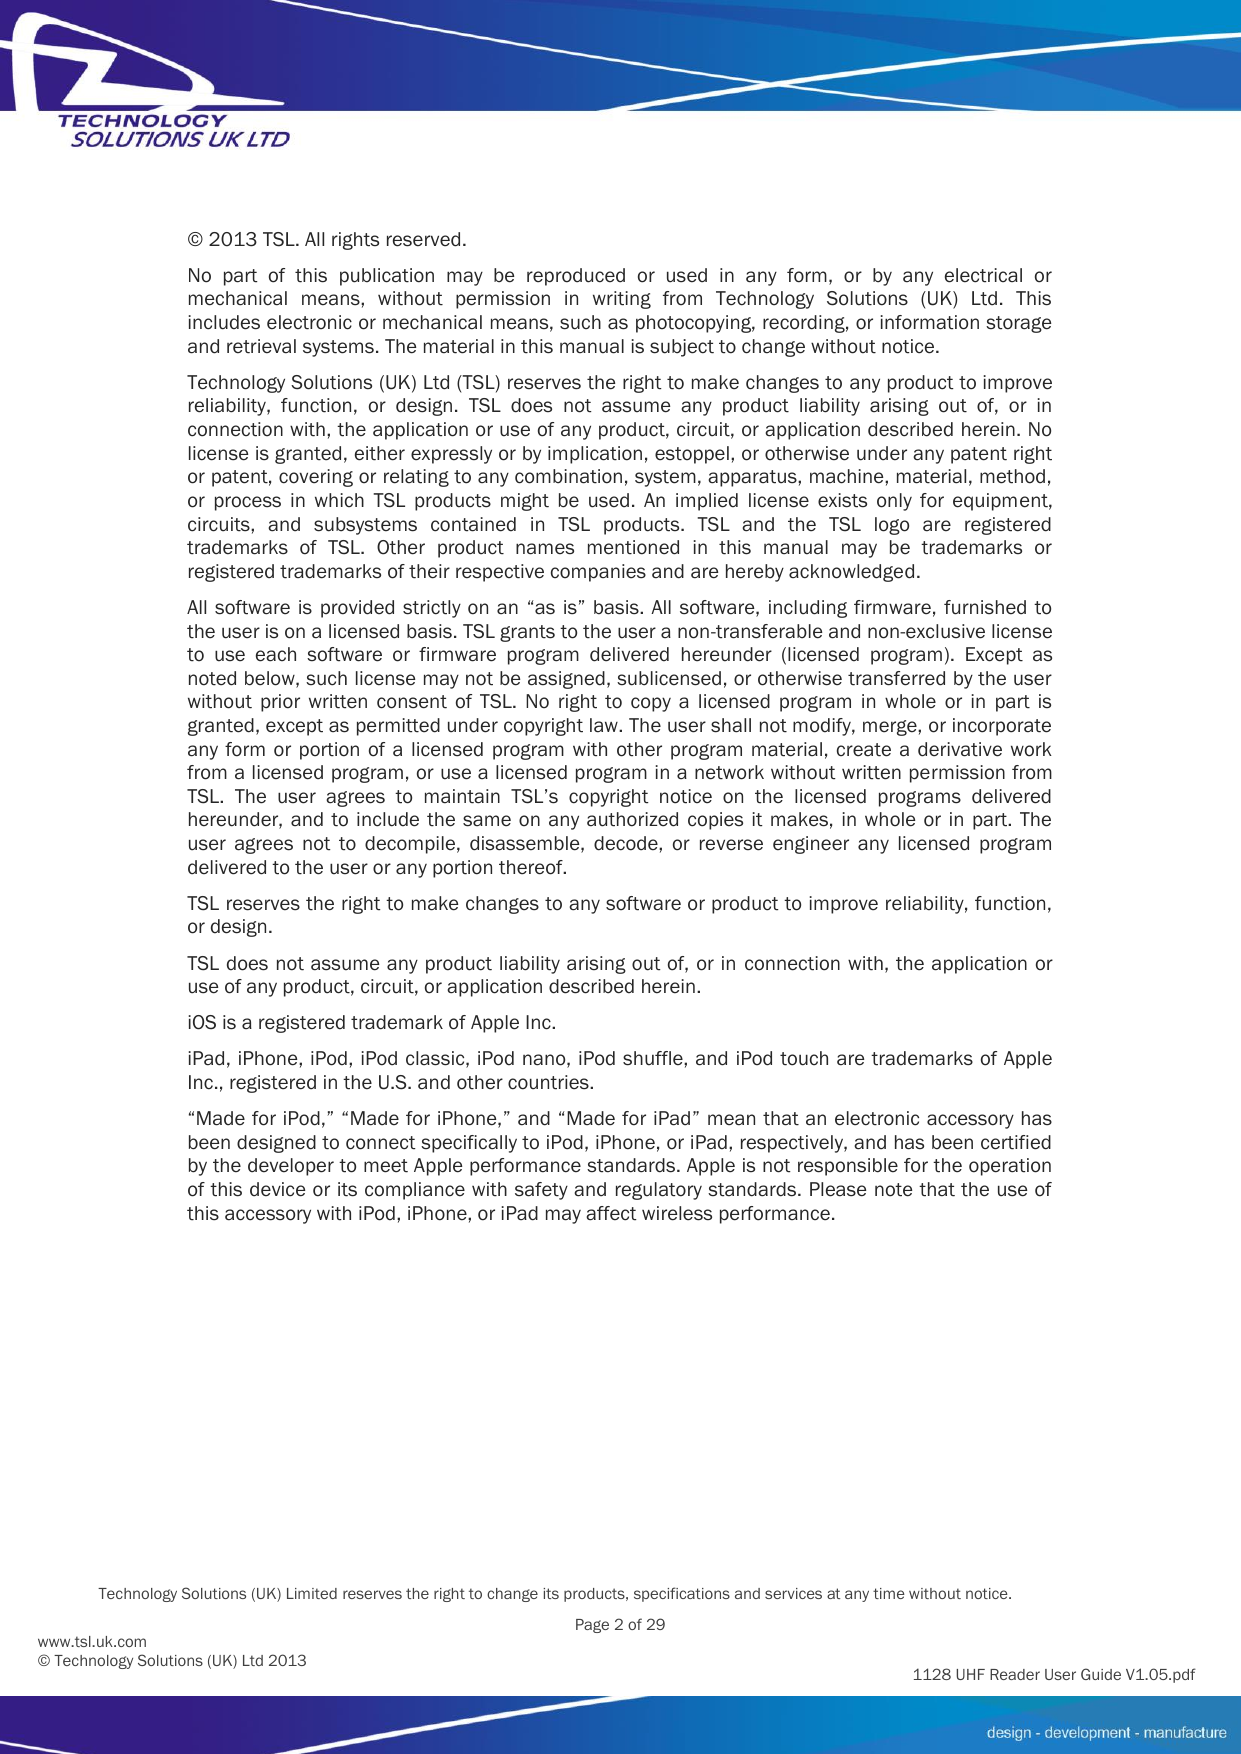          Technology Solutions (UK) Limited reserves the right to change its products, specifications and services at any time without notice.   Page 2 of 29 1128 UHF Reader User Guide V1.05.pdf www.tsl.uk.com © Technology Solutions (UK) Ltd 2013  © 2013 TSL. All rights reserved. No  part  of  this  publication  may  be  reproduced  or  used  in  any  form,  or  by  any  electrical  or mechanical  means,  without  permission  in  writing  from  Technology  Solutions  (UK)  Ltd.  This includes electronic or mechanical means, such as photocopying, recording, or information storage and retrieval systems. The material in this manual is subject to change without notice. Technology Solutions (UK) Ltd (TSL) reserves the right to make changes to any product to improve reliability,  function,  or  design.  TSL  does  not  assume  any  product  liability  arising  out  of,  or  in connection with, the application or use of any product, circuit, or application described herein. No license is granted, either expressly or by implication, estoppel, or otherwise under any patent right or patent, covering or relating to any combination, system, apparatus, machine, material, method, or  process  in  which  TSL  products  might  be  used.  An  implied  license  exists  only  for  equipment, circuits,  and  subsystems  contained  in  TSL  products.  TSL  and  the  TSL  logo  are  registered trademarks  of  TSL.  Other  product  names  mentioned  in  this  manual  may  be  trademarks  or registered trademarks of their respective companies and are hereby acknowledged. All software is  provided strictly on  an “as  is” basis. All software, including firmware, furnished to the user is on a licensed basis. TSL grants to the user a non-transferable and non-exclusive license to  use  each  software  or  firmware  program  delivered  hereunder  (licensed  program).  Except  as noted below, such license may not be assigned, sublicensed, or otherwise transferred by the user without  prior  written  consent  of  TSL.  No  right  to  copy  a  licensed  program  in  whole  or  in  part  is granted, except as permitted under copyright law. The user shall not modify, merge, or incorporate any form  or portion of  a  licensed  program  with  other program material,  create  a derivative work from a licensed program, or use a licensed program in a network without written permission from TSL.  The  user  agrees  to  maintain  TSL’s  copyright  notice  on  the  licensed  programs  delivered hereunder, and  to include the same on any authorized copies  it makes, in  whole  or in  part. The user  agrees  not  to  decompile,  disassemble,  decode,  or  reverse  engineer  any  licensed  program delivered to the user or any portion thereof. TSL reserves the right to make changes to any software or product to improve reliability, function, or design. TSL does not assume any product liability arising out of, or in connection with, the application or use of any product, circuit, or application described herein. iOS is a registered trademark of Apple Inc. iPad, iPhone, iPod, iPod classic, iPod nano, iPod shuffle, and iPod touch are trademarks of Apple Inc., registered in the U.S. and other countries. “Made for iPod,” “Made for iPhone,” and “Made for iPad” mean that an electronic accessory has been designed to connect specifically to iPod, iPhone, or iPad, respectively, and has been certified by the developer to meet Apple performance standards. Apple is not responsible for the operation of this device or its compliance with safety and regulatory standards. Please note that the use of this accessory with iPod, iPhone, or iPad may affect wireless performance. 